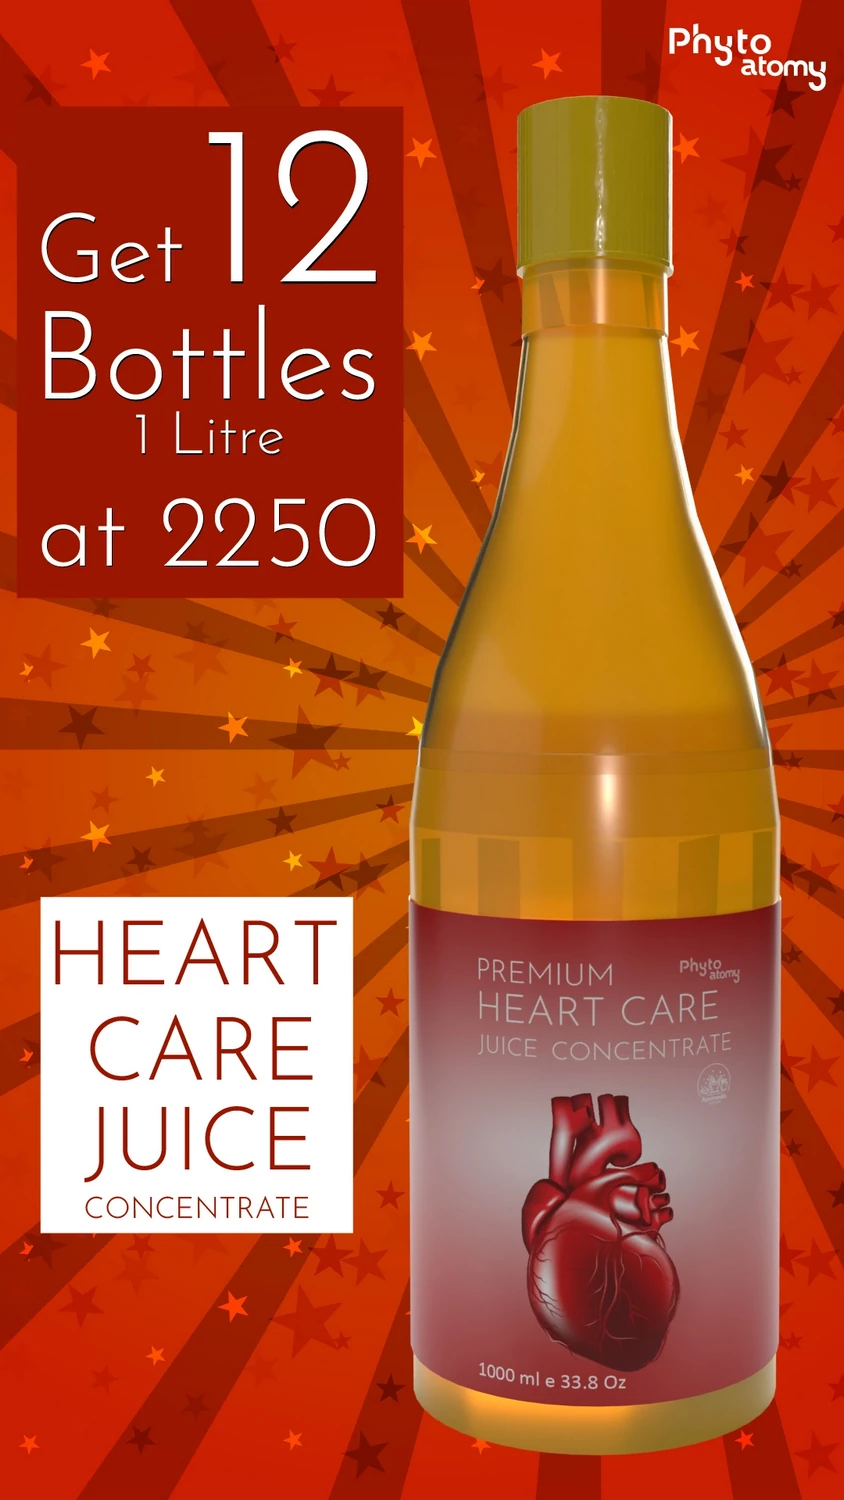 RBV B2B Heart Care Juice Concentrate 1Ltr. (12 Bottle)